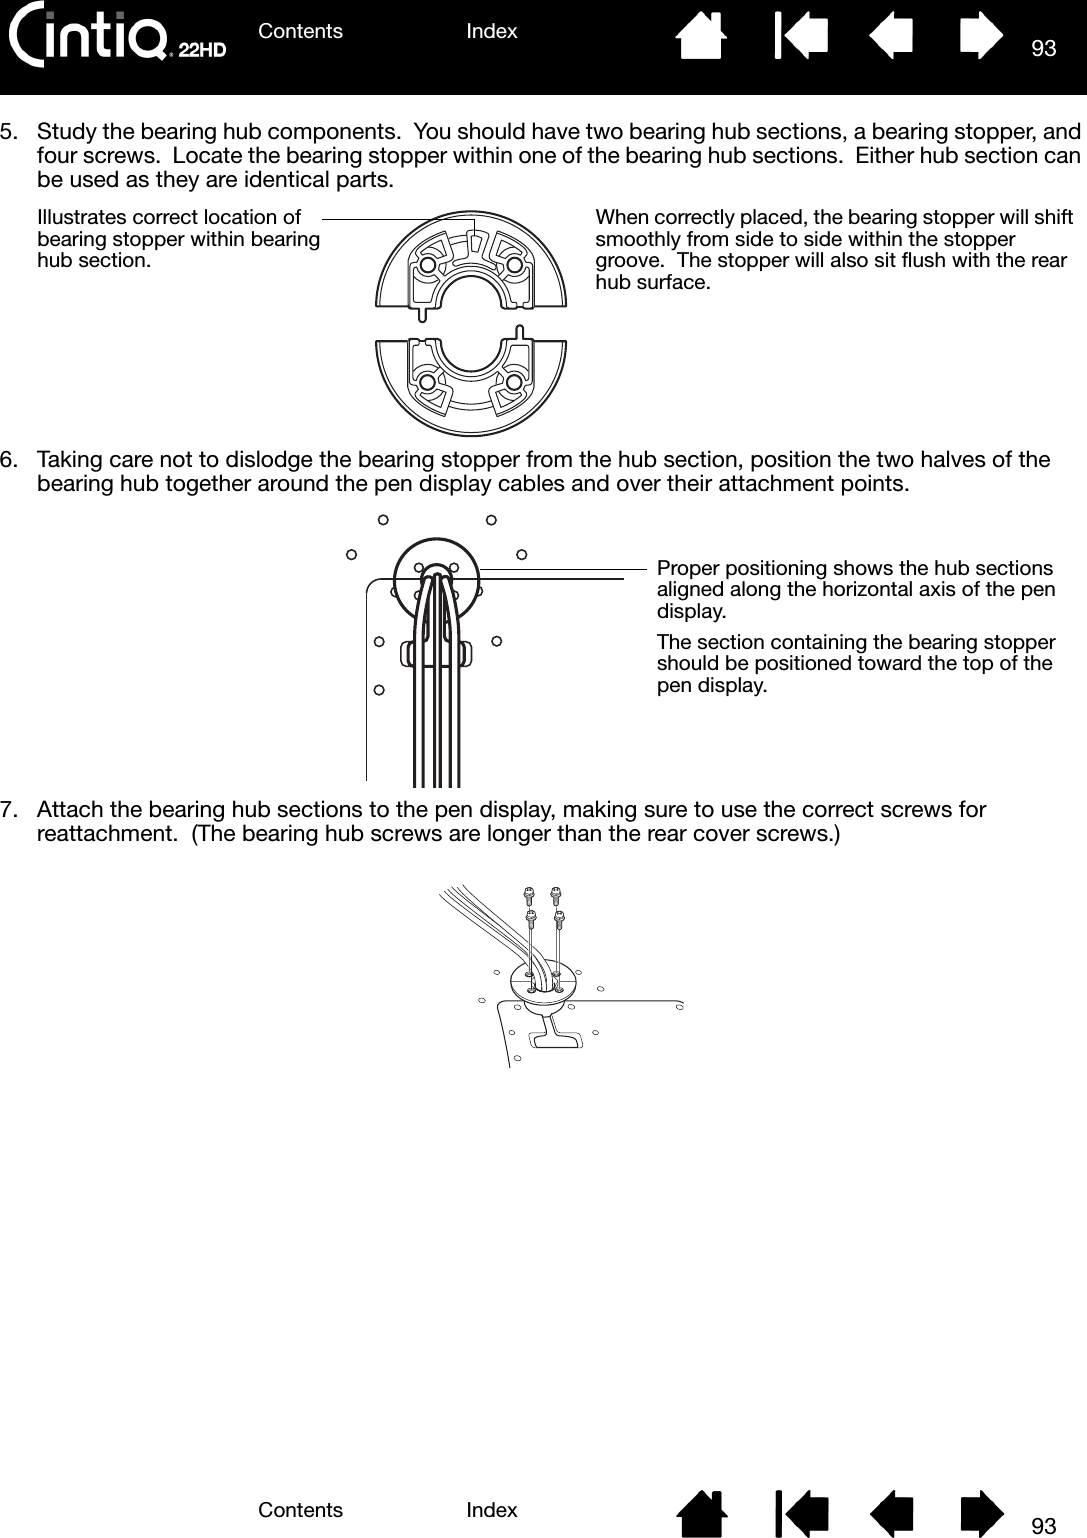 Contents IndexContents 93Index935. Study the bearing hub components.  You should have two bearing hub sections, a bearing stopper, and four screws.  Locate the bearing stopper within one of the bearing hub sections.  Either hub section can be used as they are identical parts.  6. Taking care not to dislodge the bearing stopper from the hub section, position the two halves of the bearing hub together around the pen display cables and over their attachment points.7. Attach the bearing hub sections to the pen display, making sure to use the correct screws for reattachment.  (The bearing hub screws are longer than the rear cover screws.)Illustrates correct location of bearing stopper within bearing hub section.When correctly placed, the bearing stopper will shift smoothly from side to side within the stopper groove.  The stopper will also sit flush with the rear hub surface.Proper positioning shows the hub sections aligned along the horizontal axis of the pen display.The section containing the bearing stopper should be positioned toward the top of the pen display.